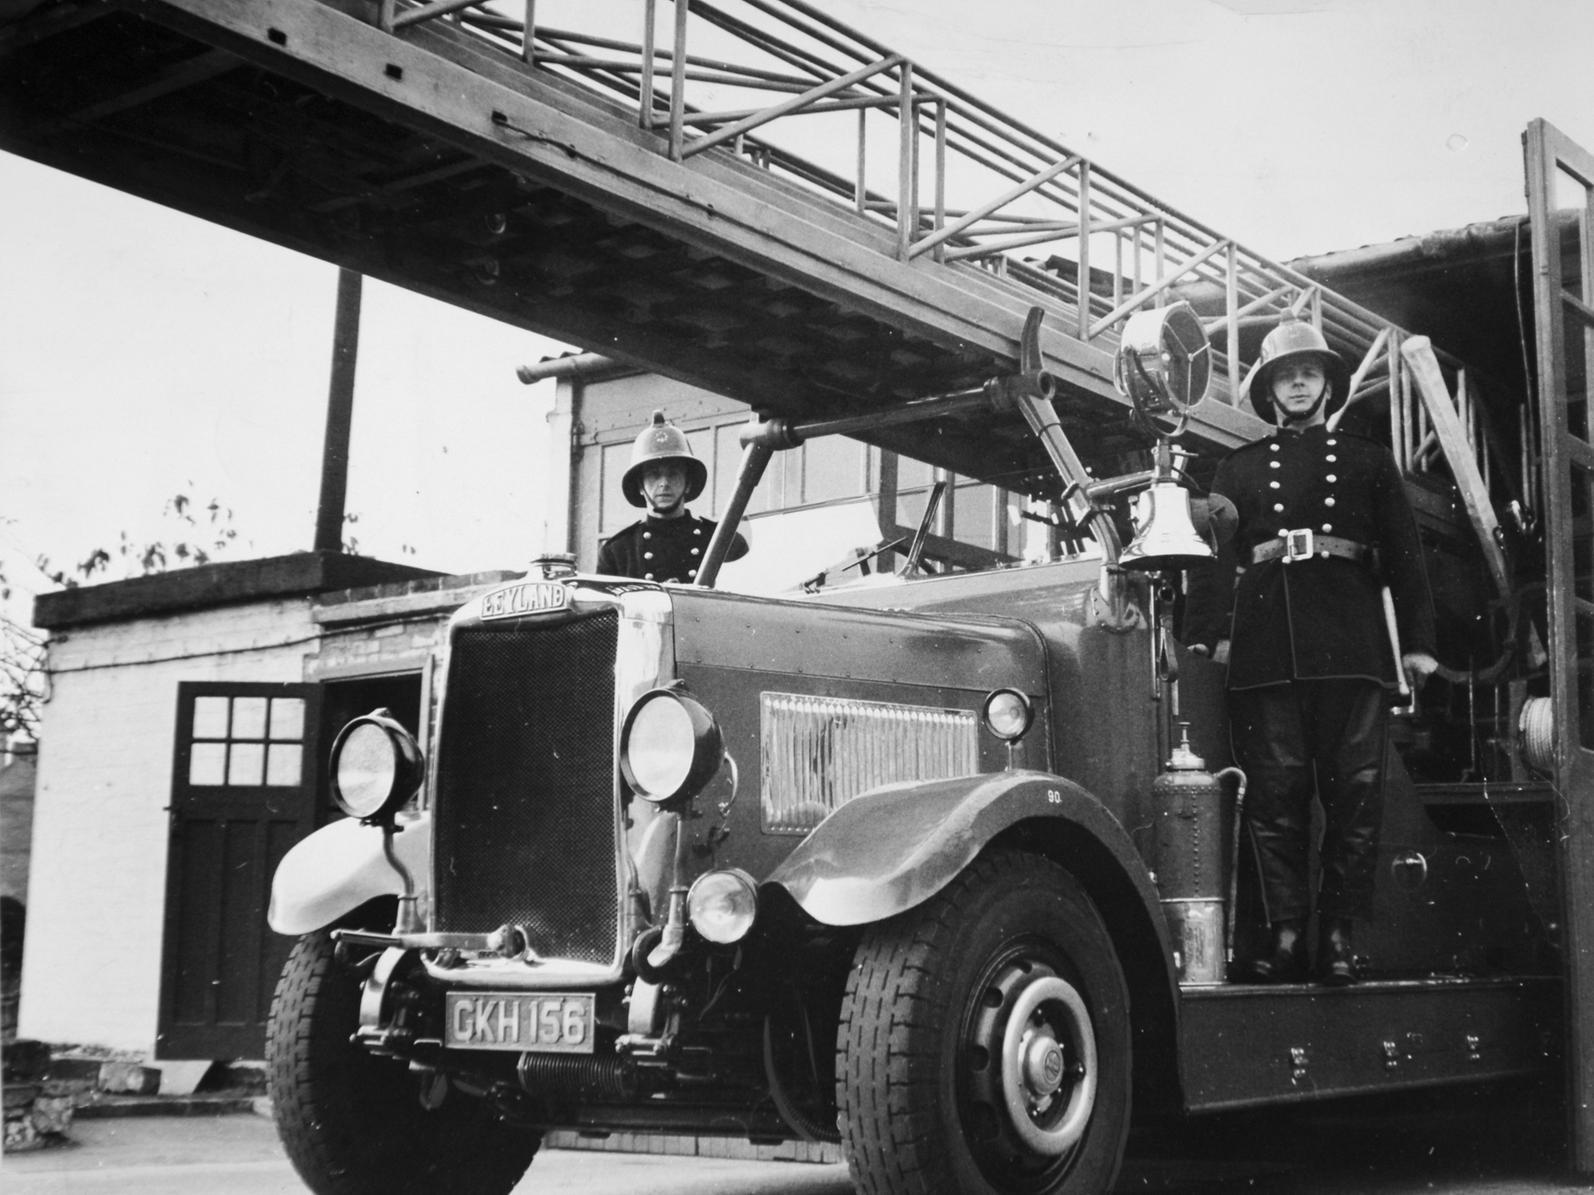 Members of Dewsbury Fire Brigade stand by a 22 year old turntable fire engine. The fire engine saw service in Hull during the Nazi blitz and was damaged by shrapnel.